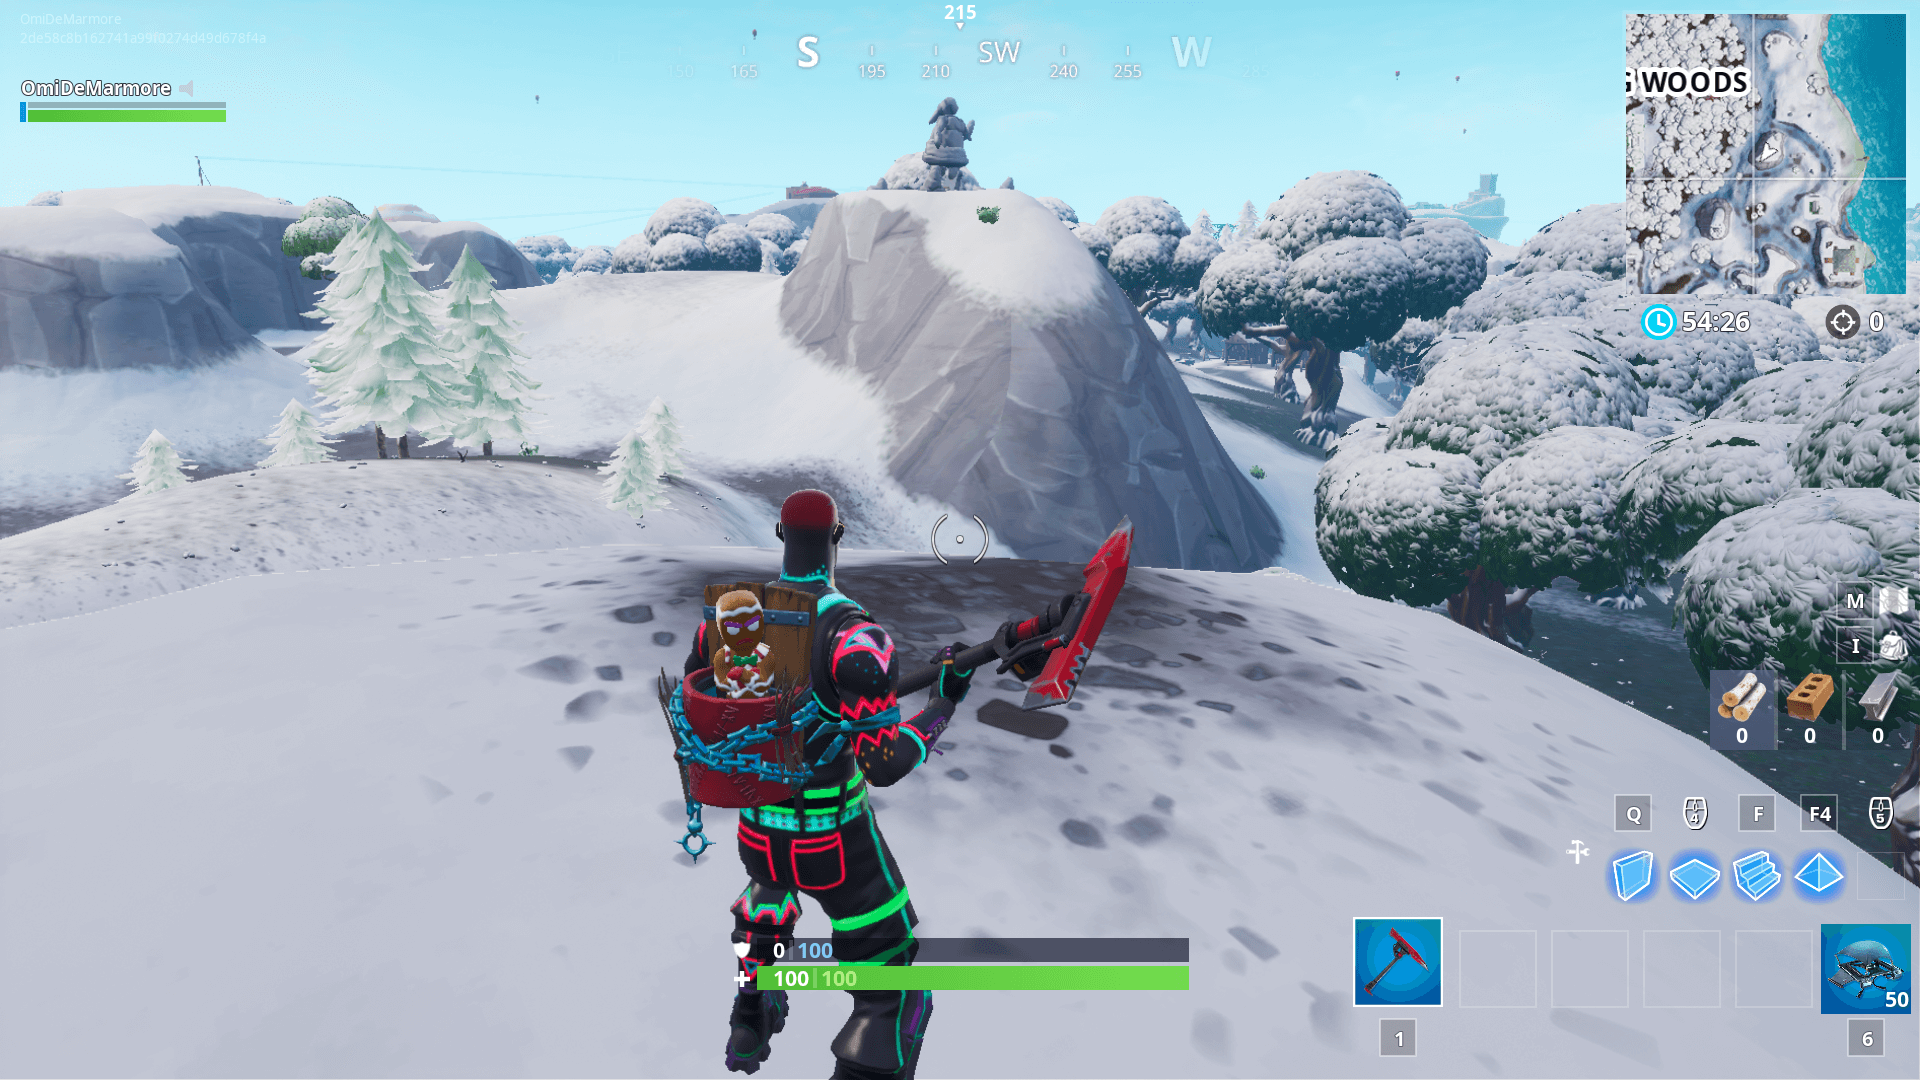 Fortnite Mysterious Hatch Giant Rock Lady And Precarious Flatbed - where to search between a mysterious hatch a giant rock lady and a precarious flatbed for fortnite s season 7 week 8 challenge